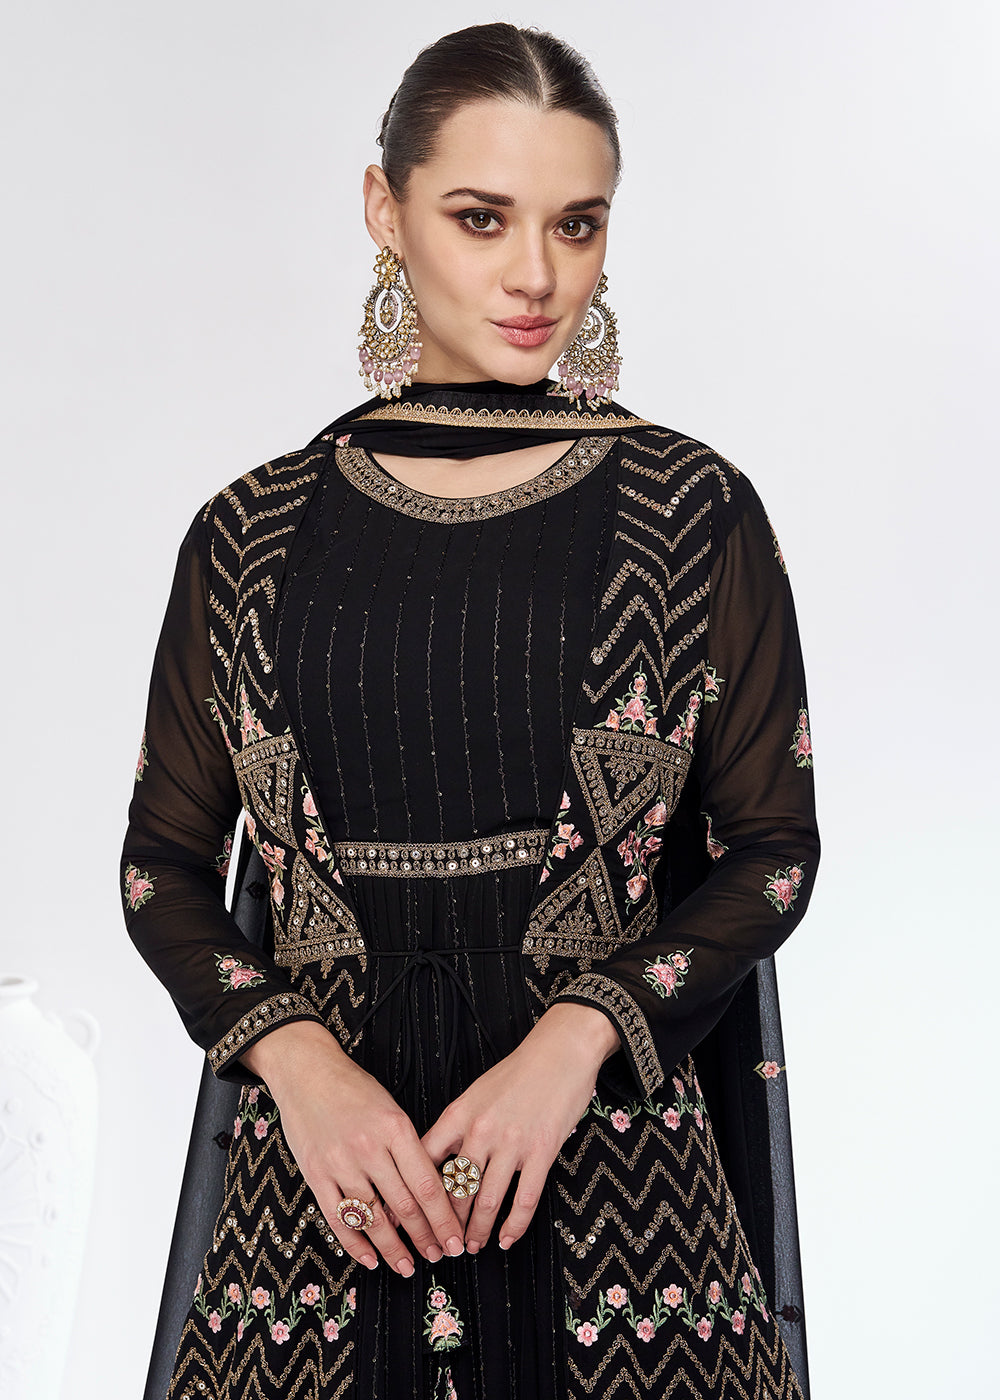 Buy Now Georgette Premium Black Embroidered Wedding Anarkali Suit Online in USA, UK, Australia, New Zealand, Canada & Worldwide at Empress Clothing.